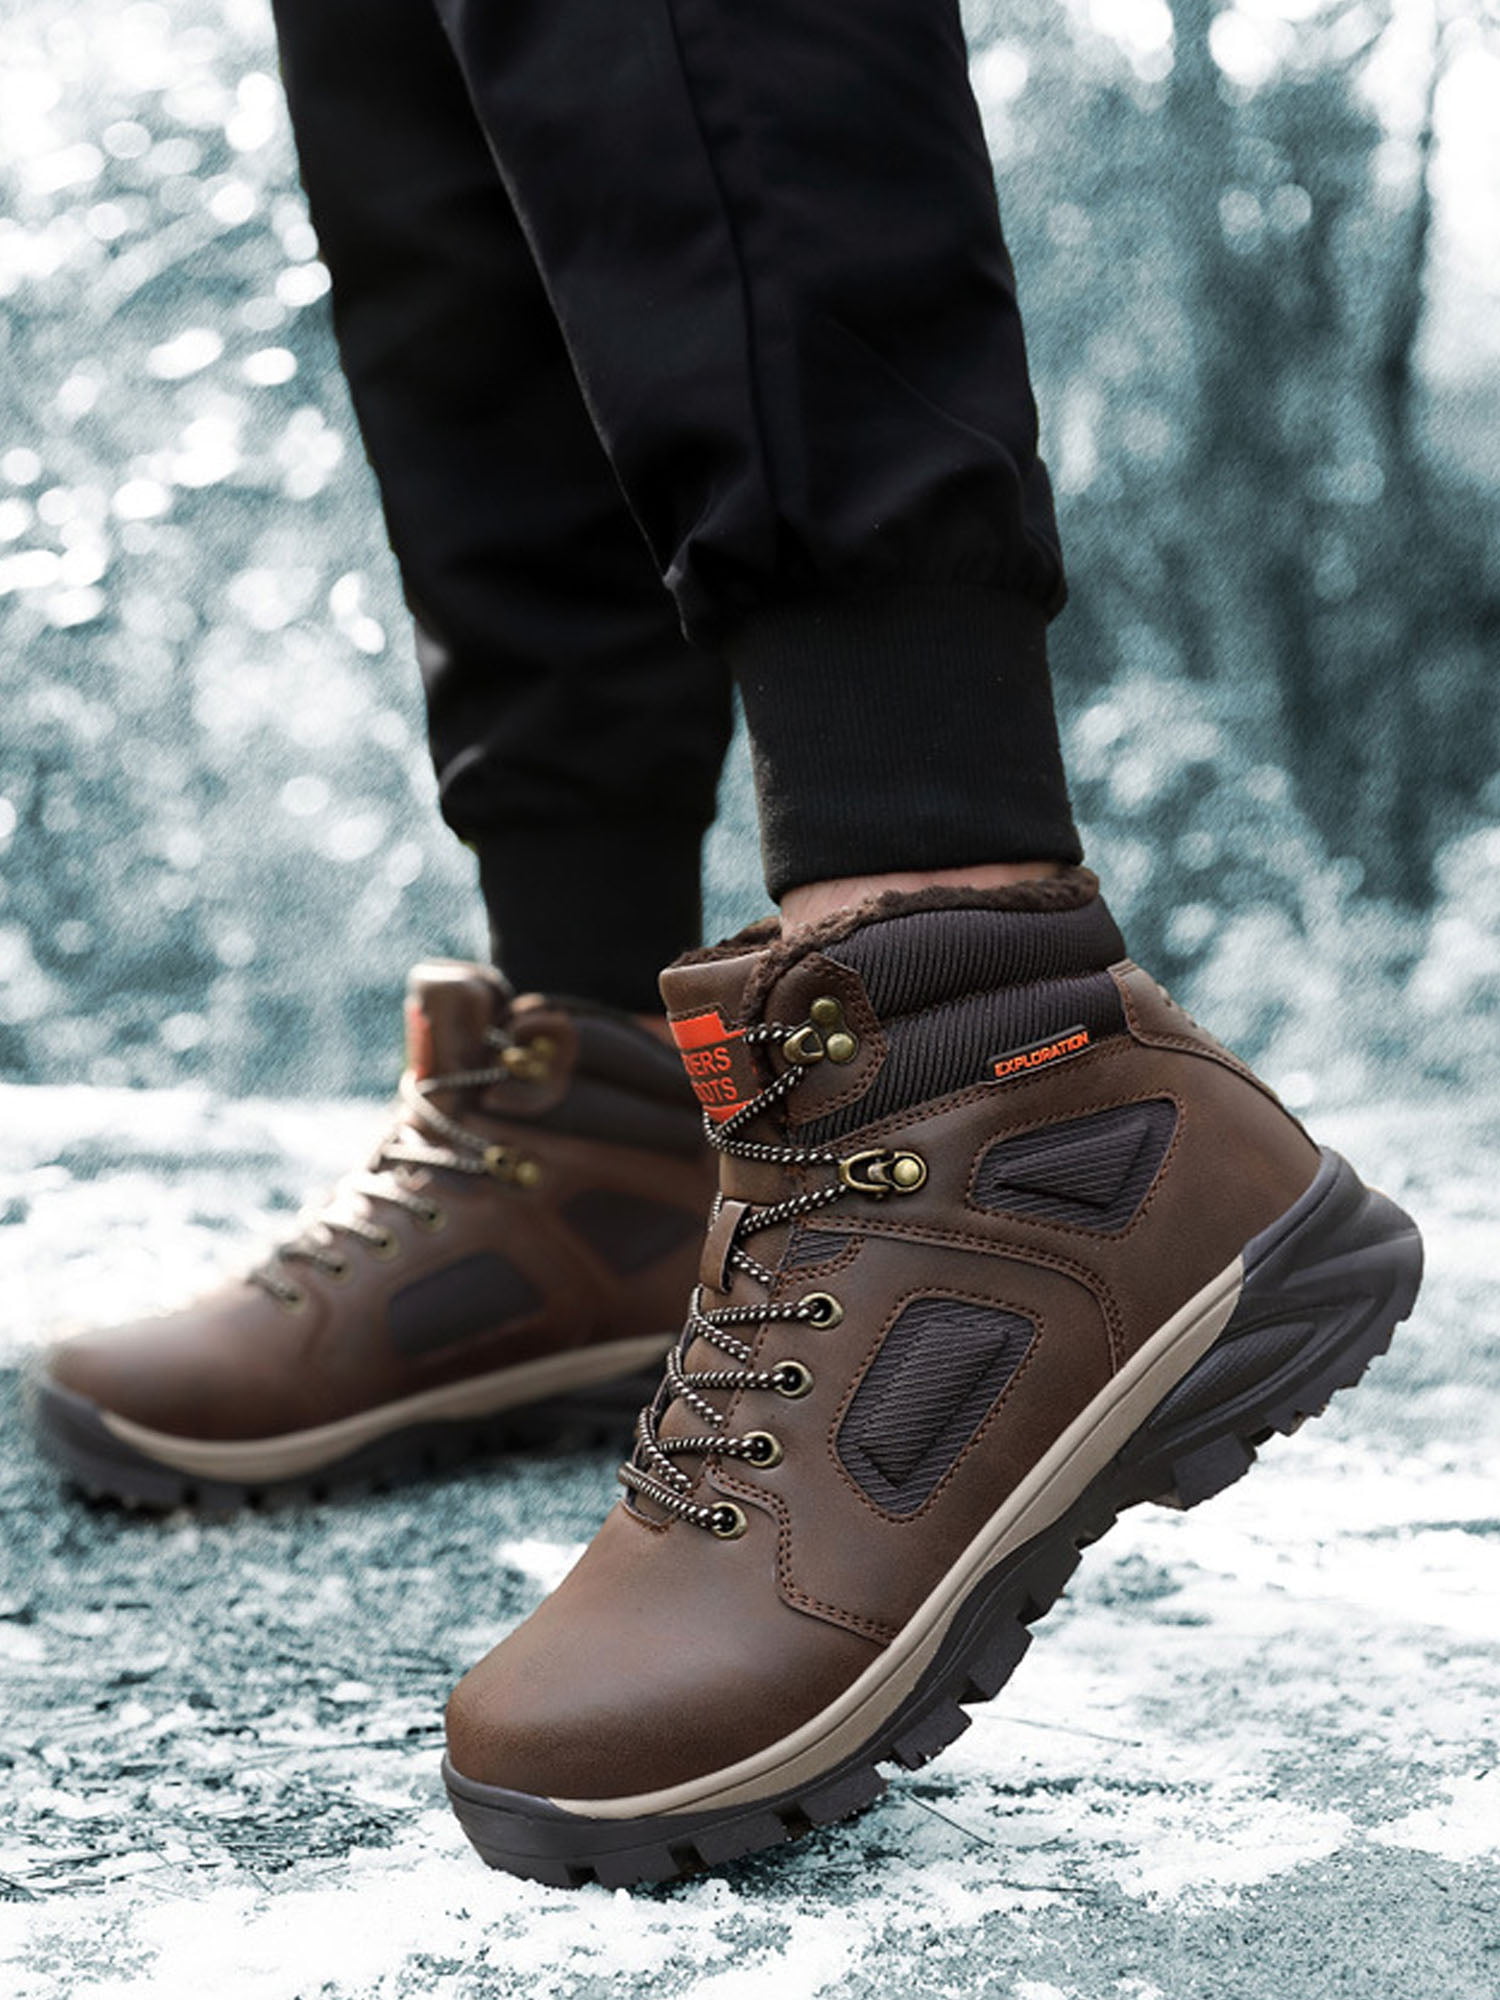 New Men”s Winter Snow Warm Waterproof Boots Shoes Ankle Boots 